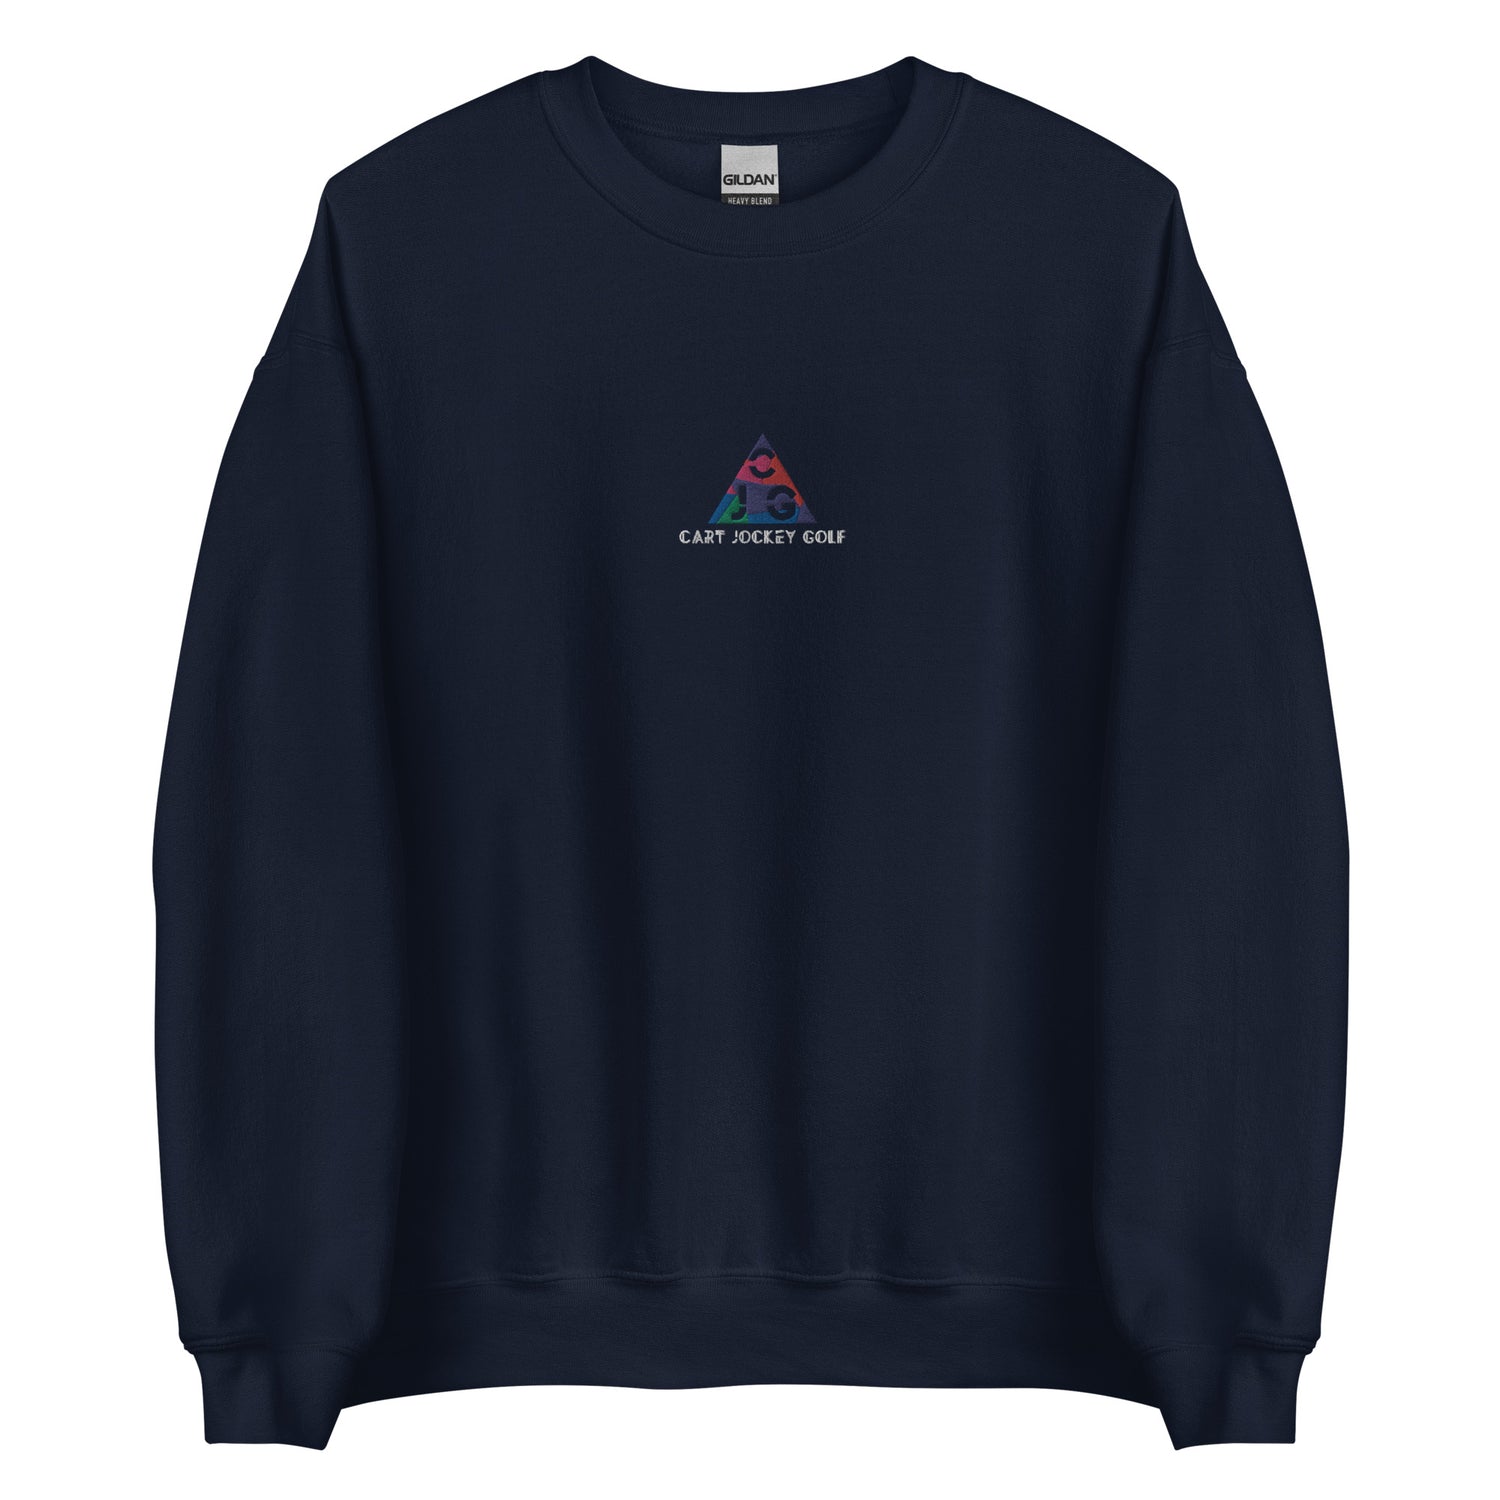 a navy sweatshirt with a Triangle Embroidered Crewneck logo on it by Cart Jockey Golf.